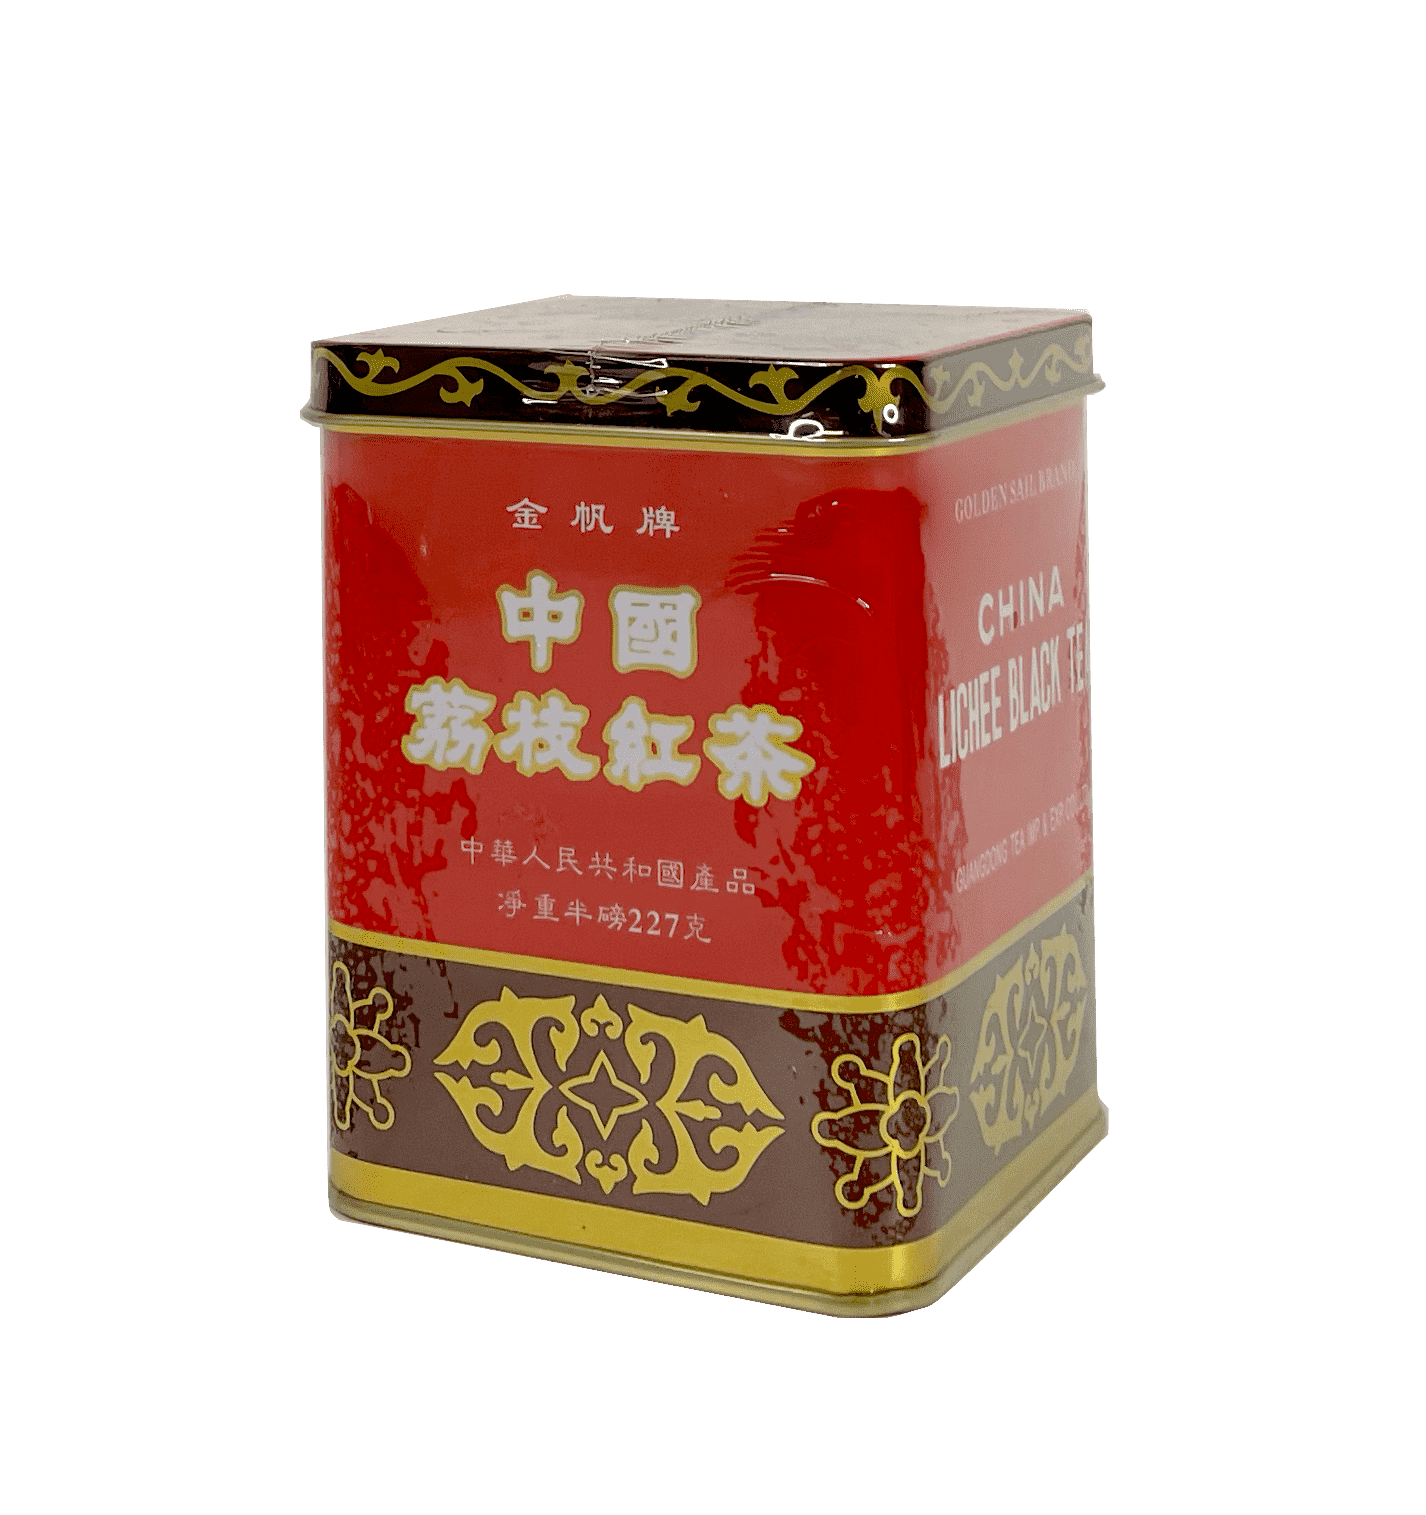 Black Tea With Lychee Flavour 227g Golden Sail China